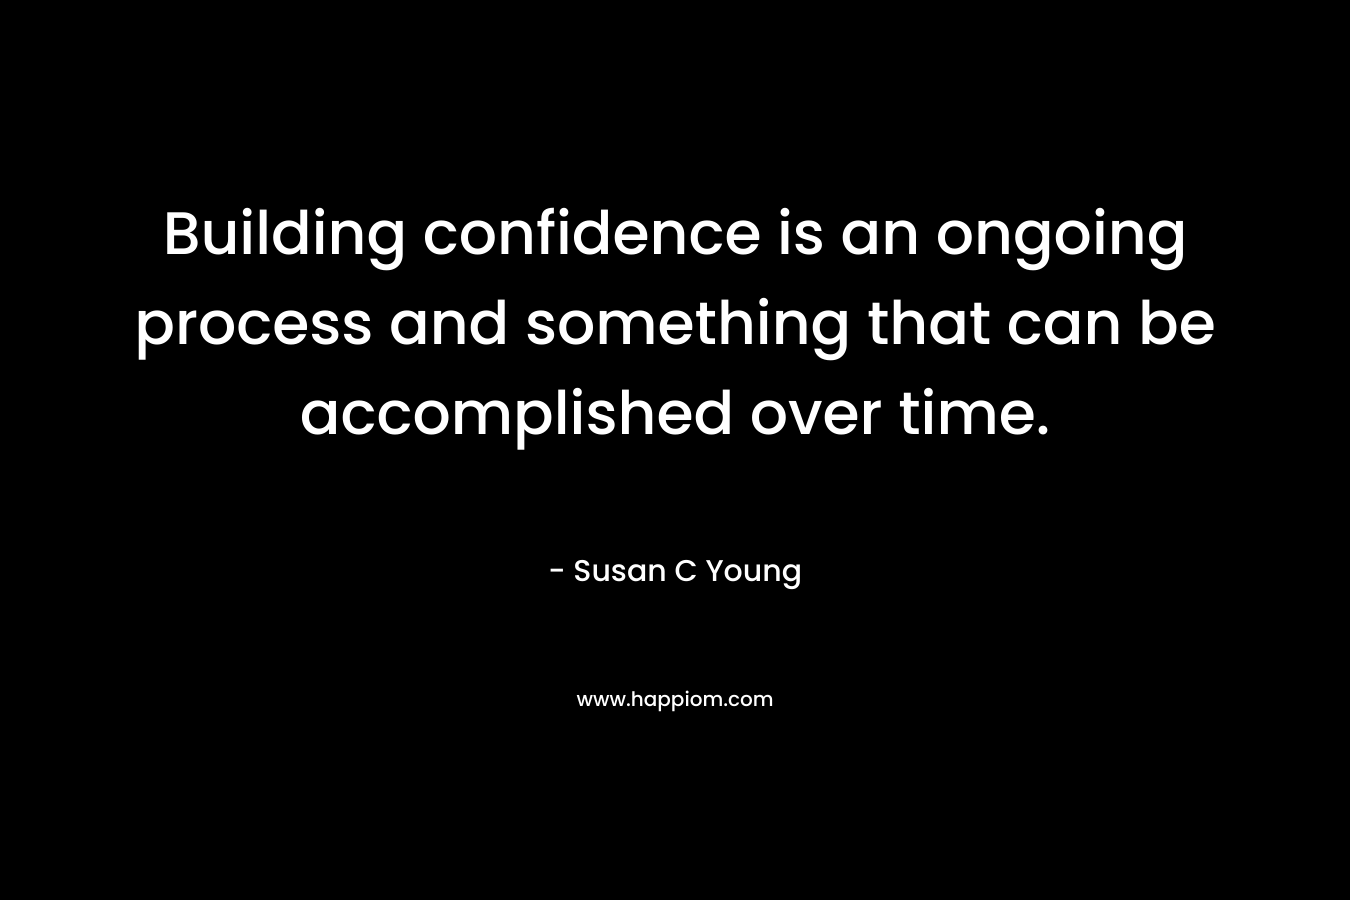 Building confidence is an ongoing process and something that can be accomplished over time. – Susan C Young